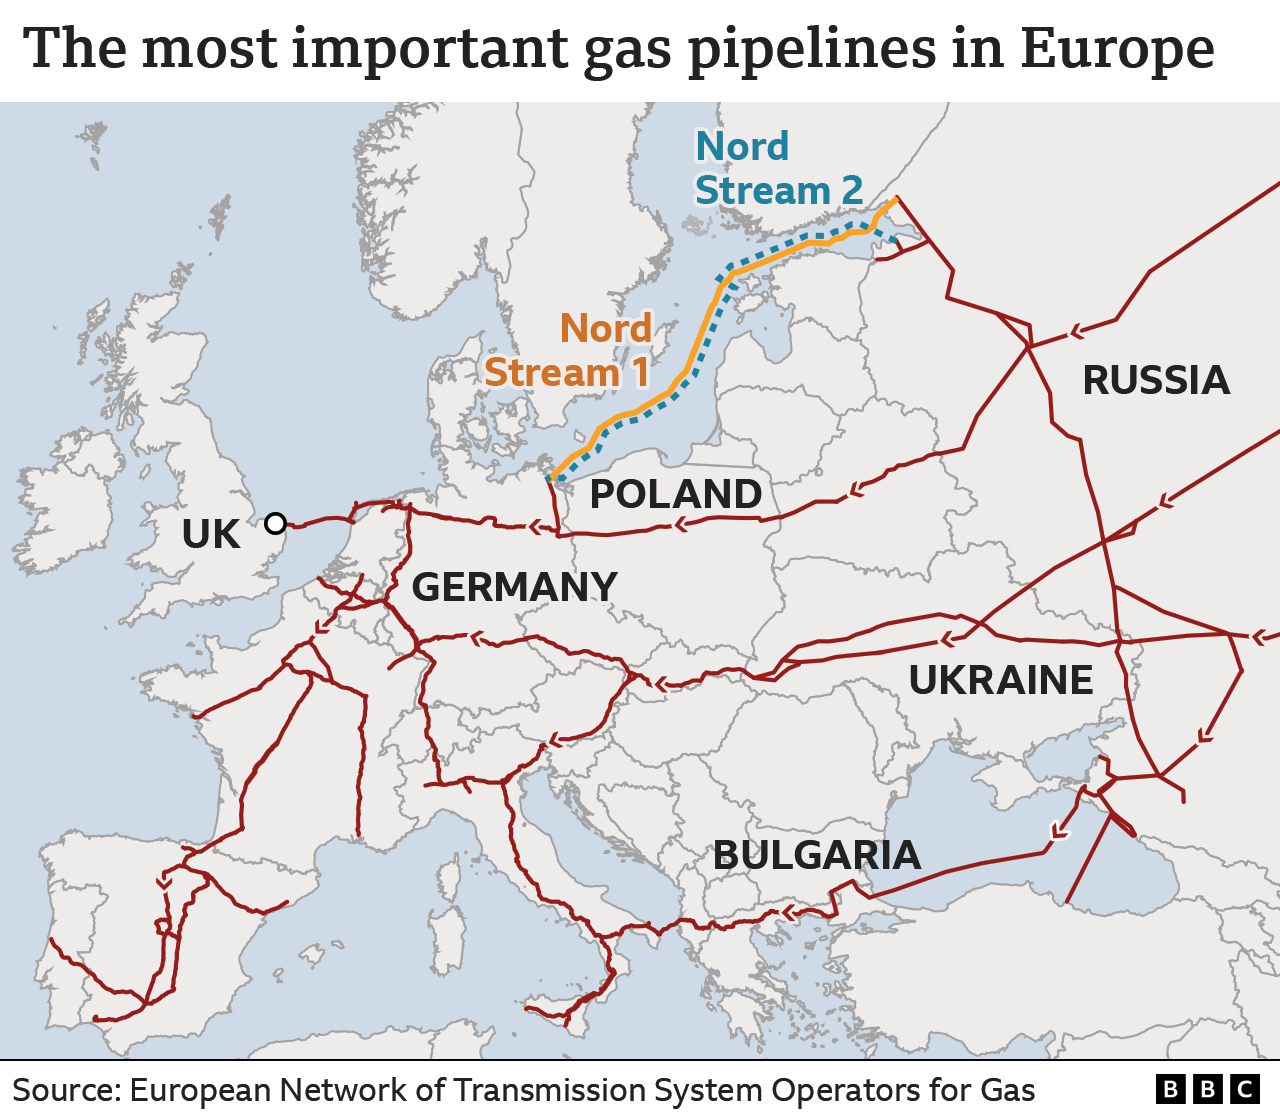 A map showing gas pipelines across Europe